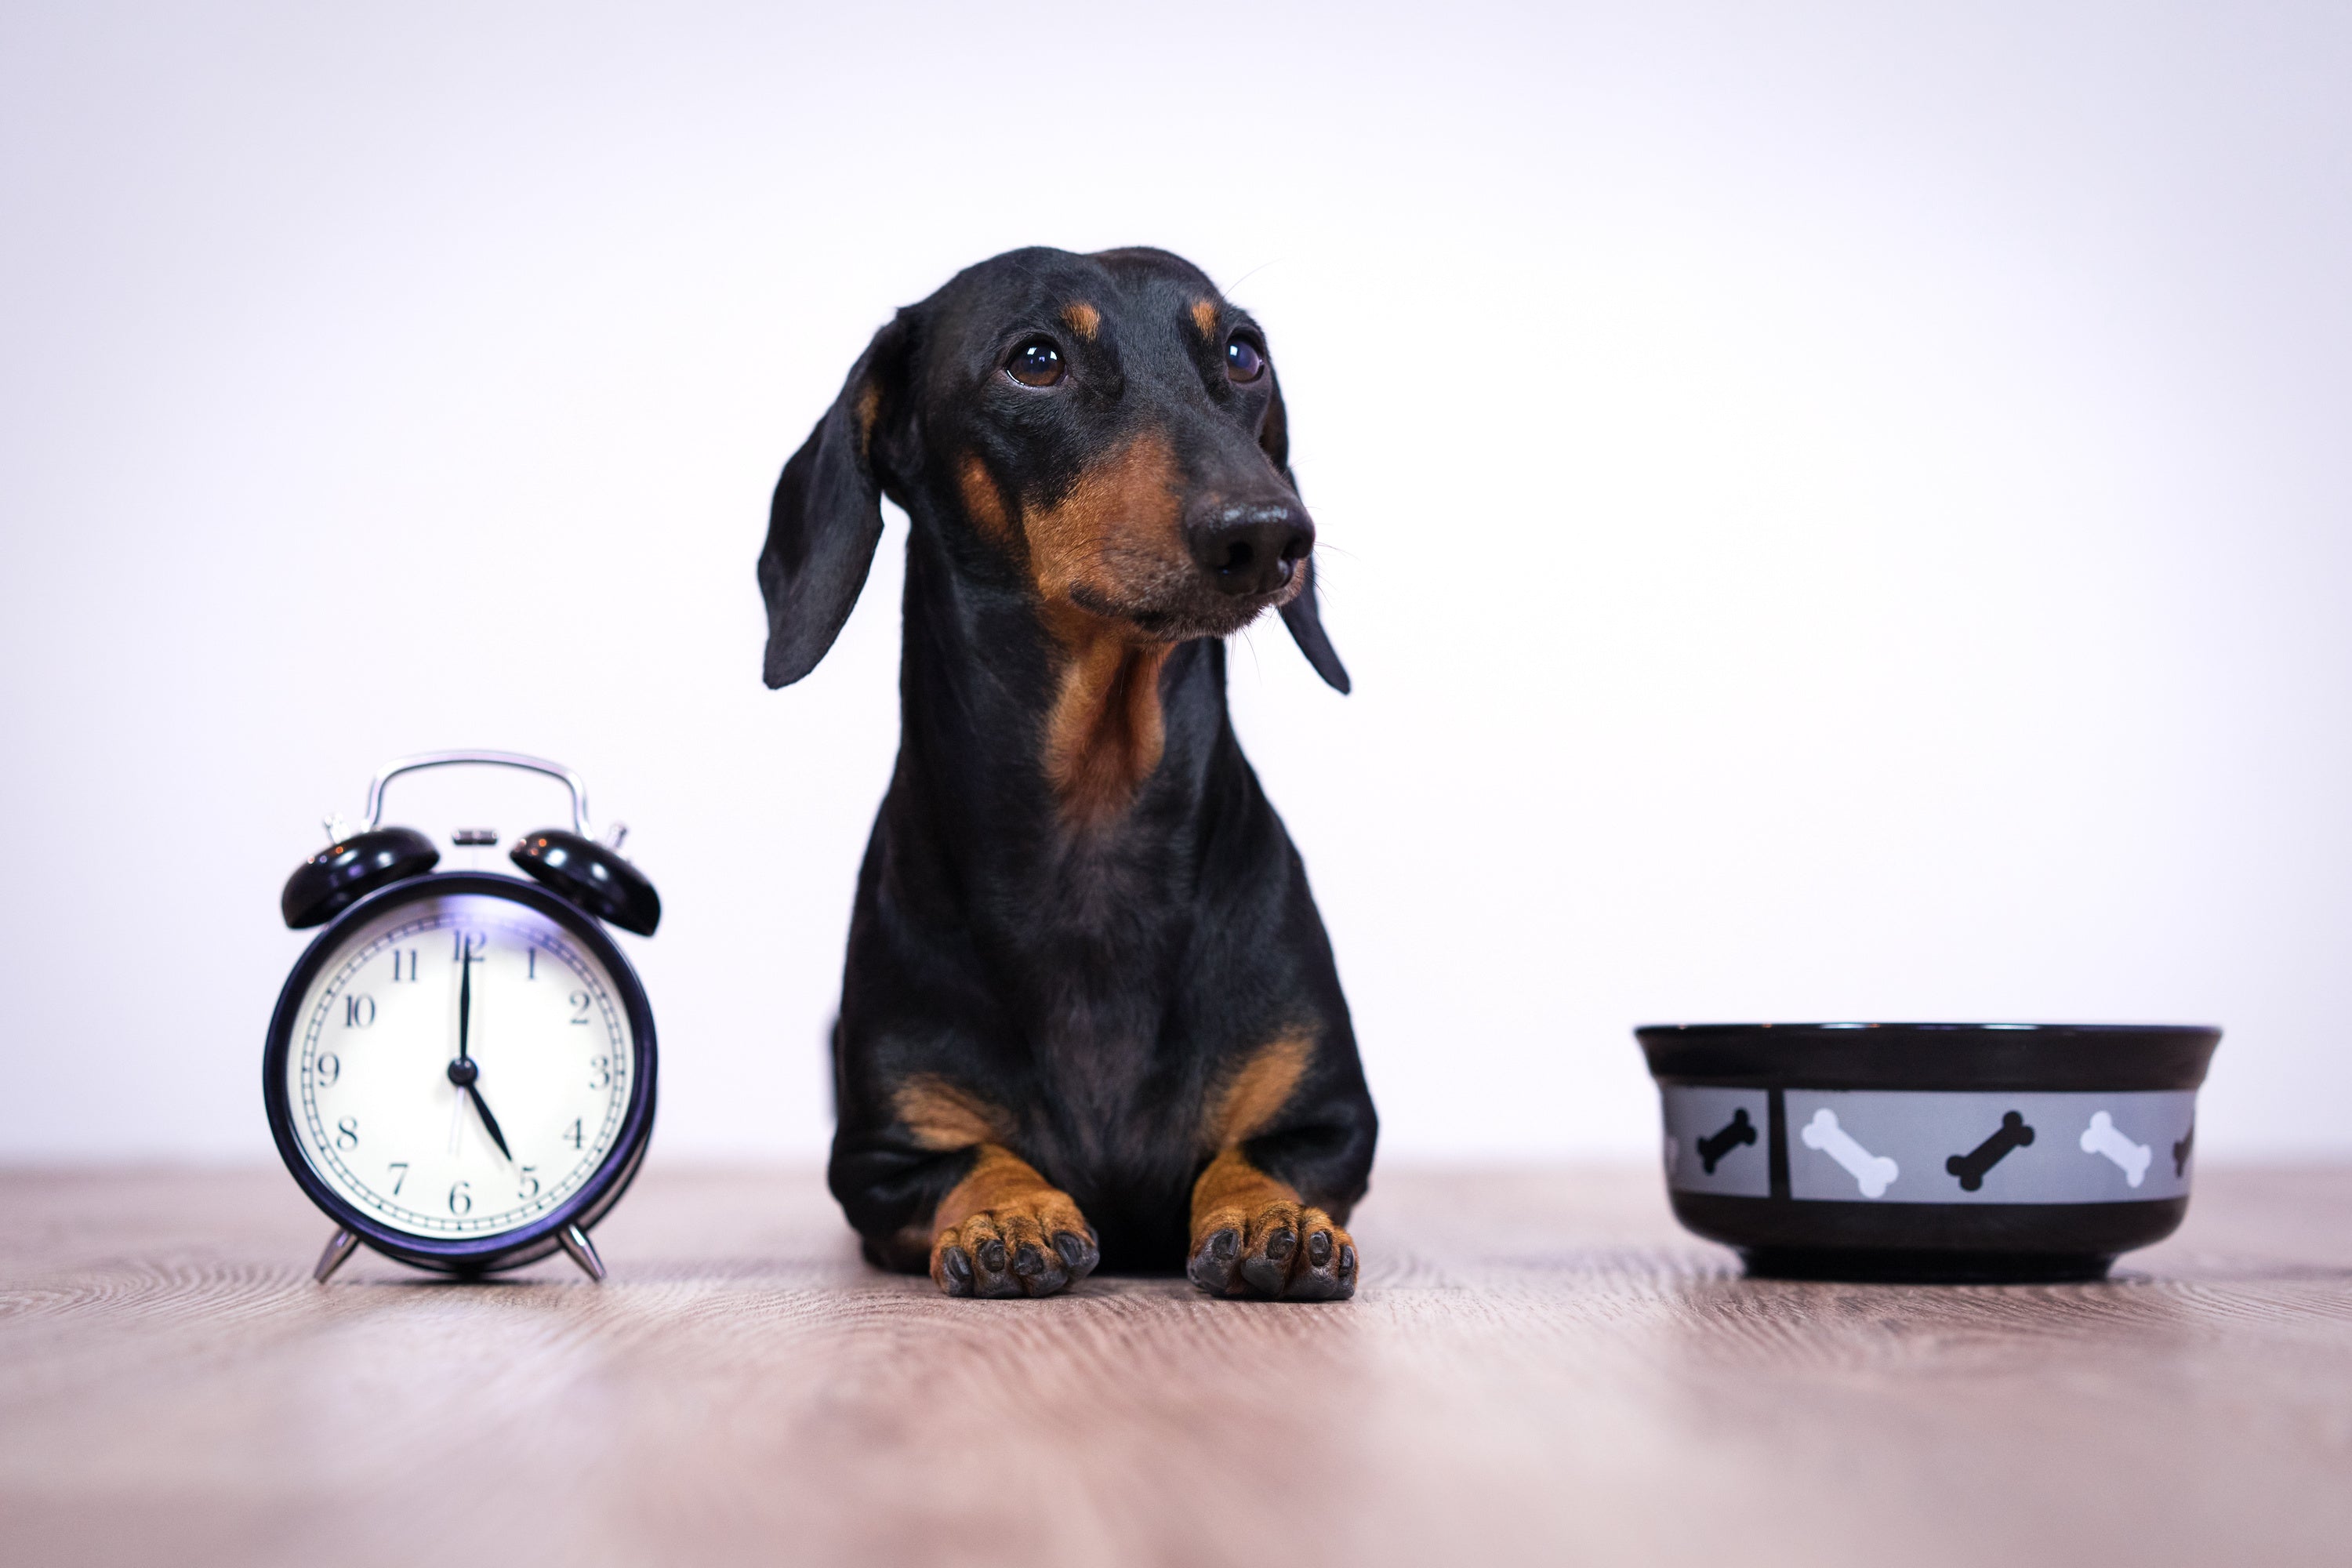 A dog's feeding schedule: when and how often to feed your dog